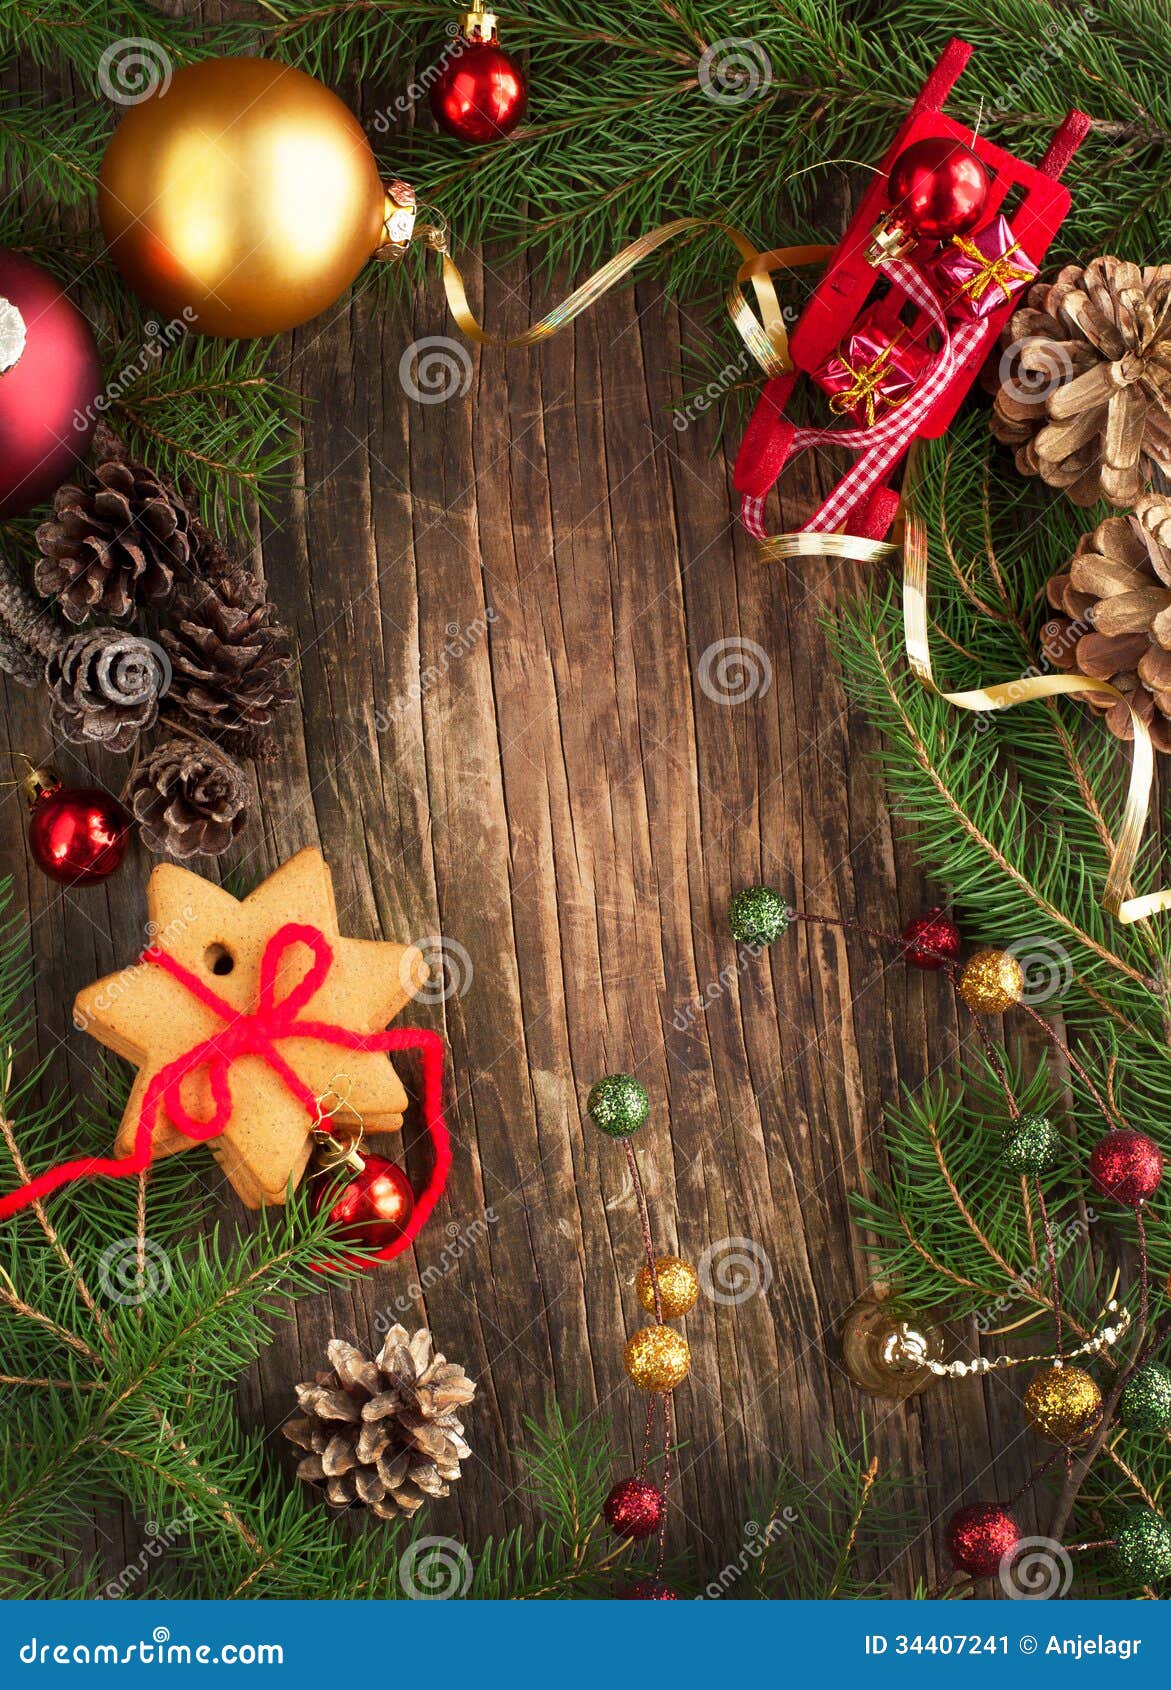 Frame with Christmas Tree Branches, Cookies and Ornaments Stock Image ...